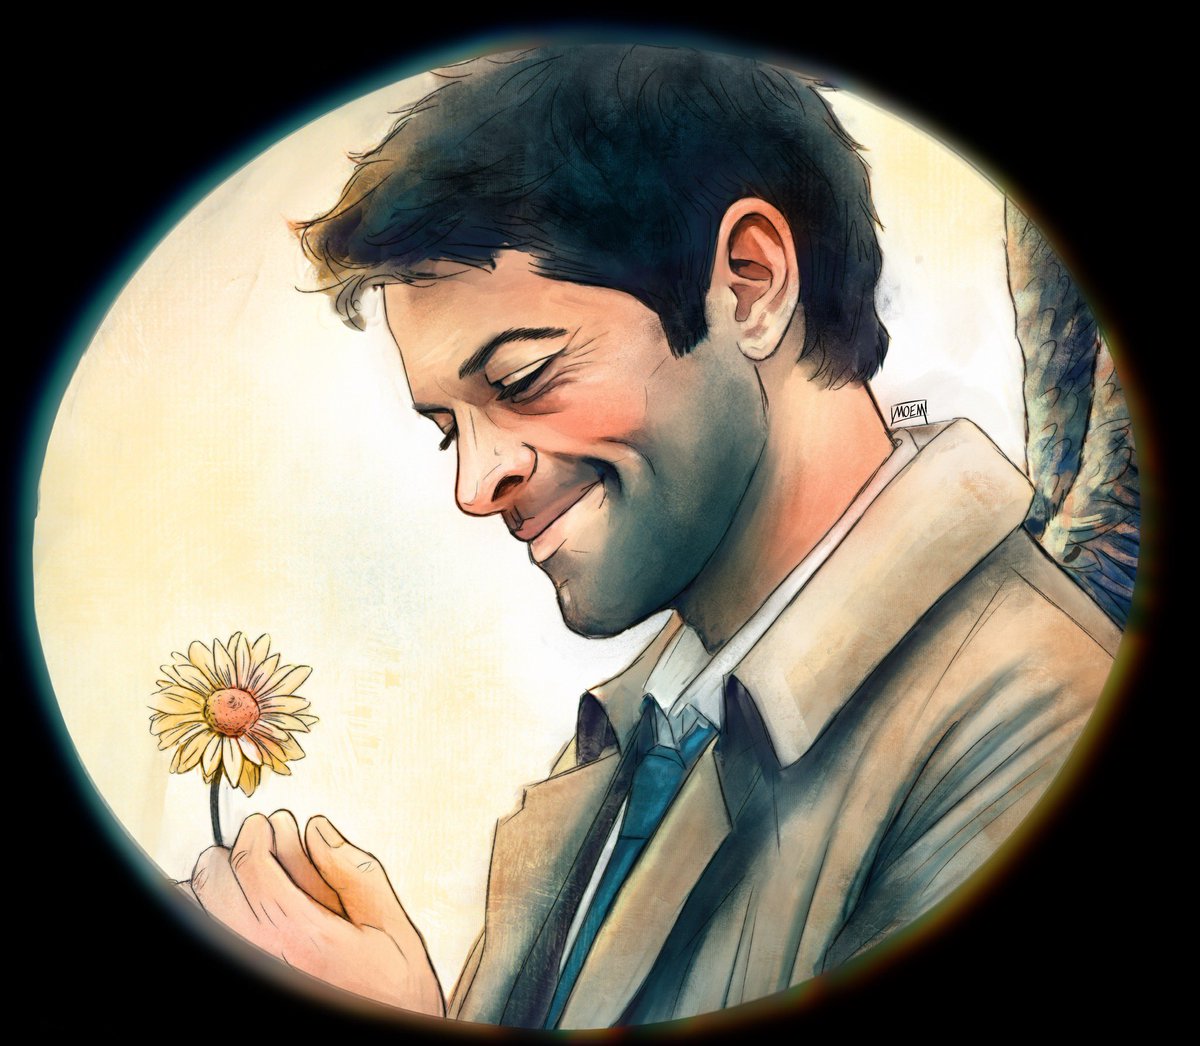 Castiel deserves to be happy. 

I uploaded this smiley angel on my Redbubble shop M-O-E-M. Check it out for prints and more.